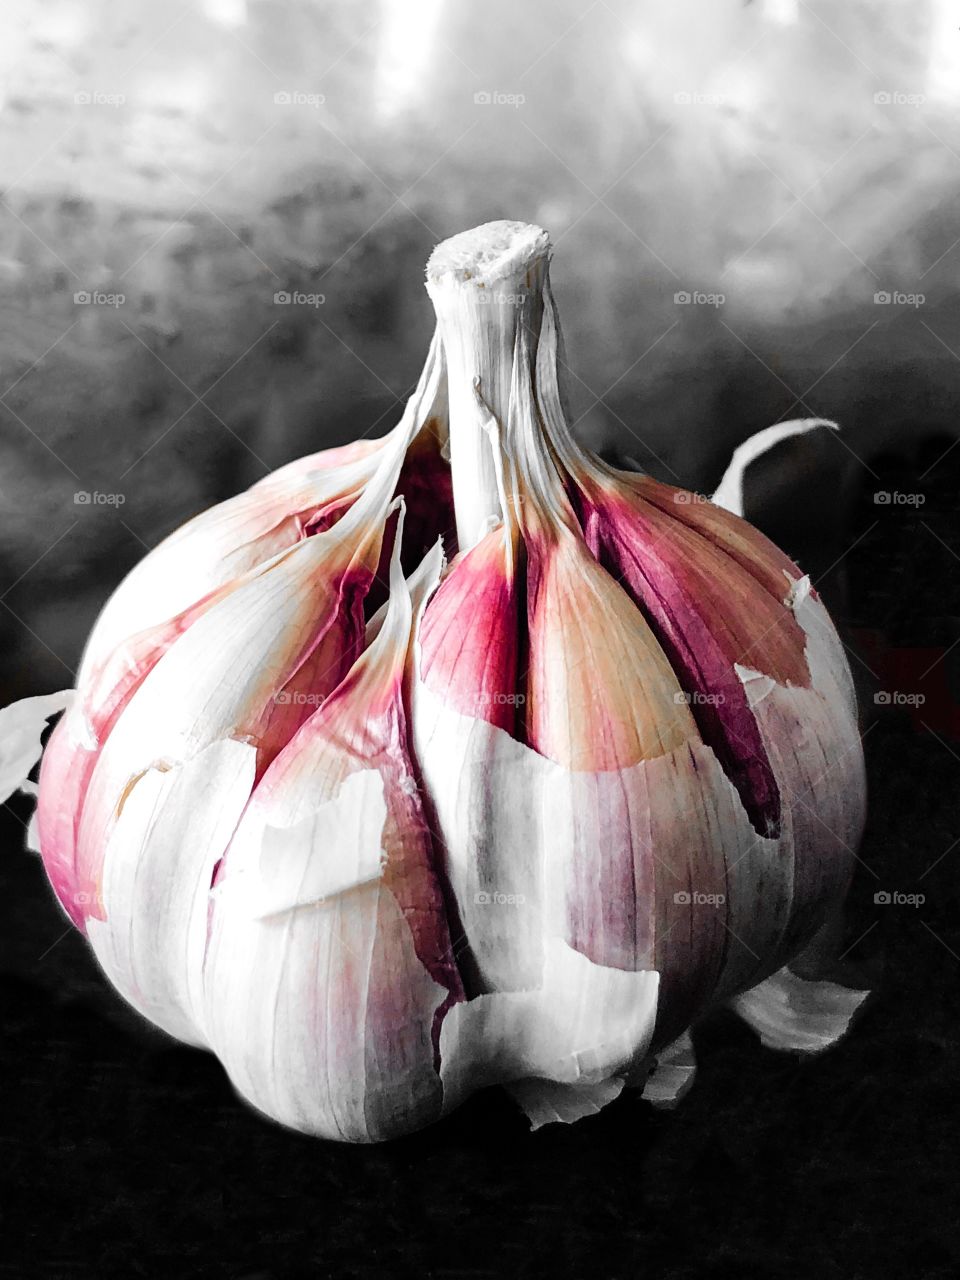 A garlic bulb with its cloves Waiting To Be peeled